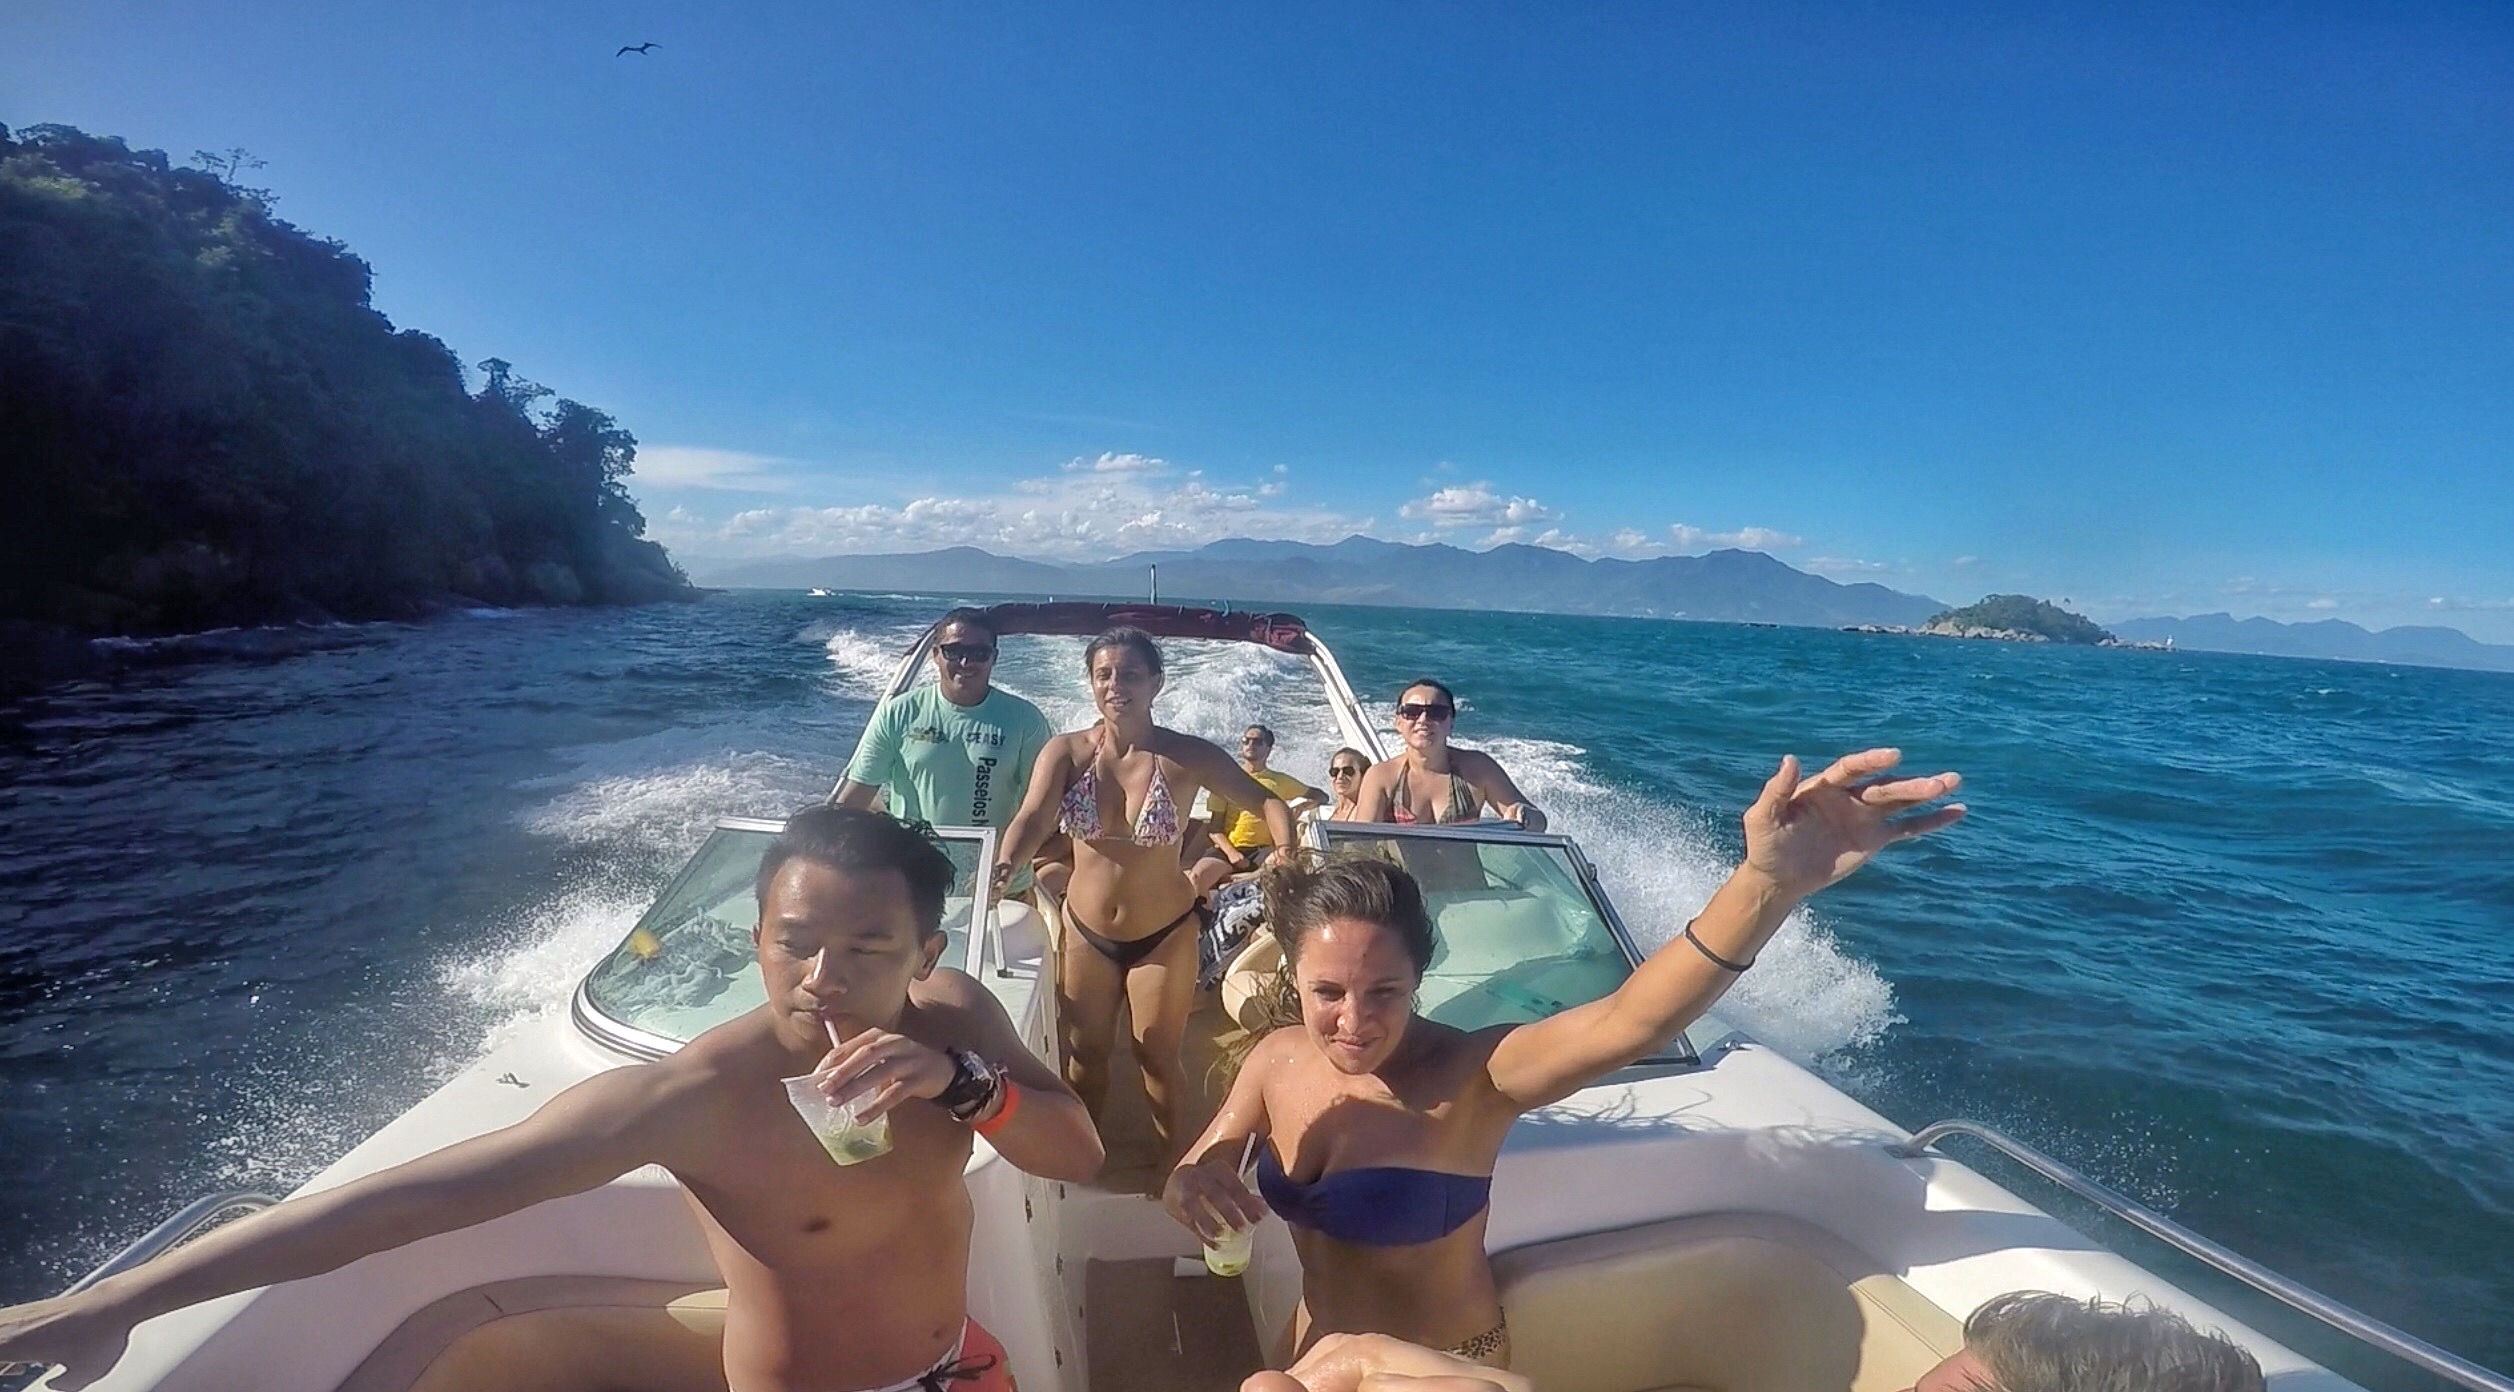 Friends at speedboat tour in Ilha Grande, Brazil. Ilha Grande cures the hangover from hell